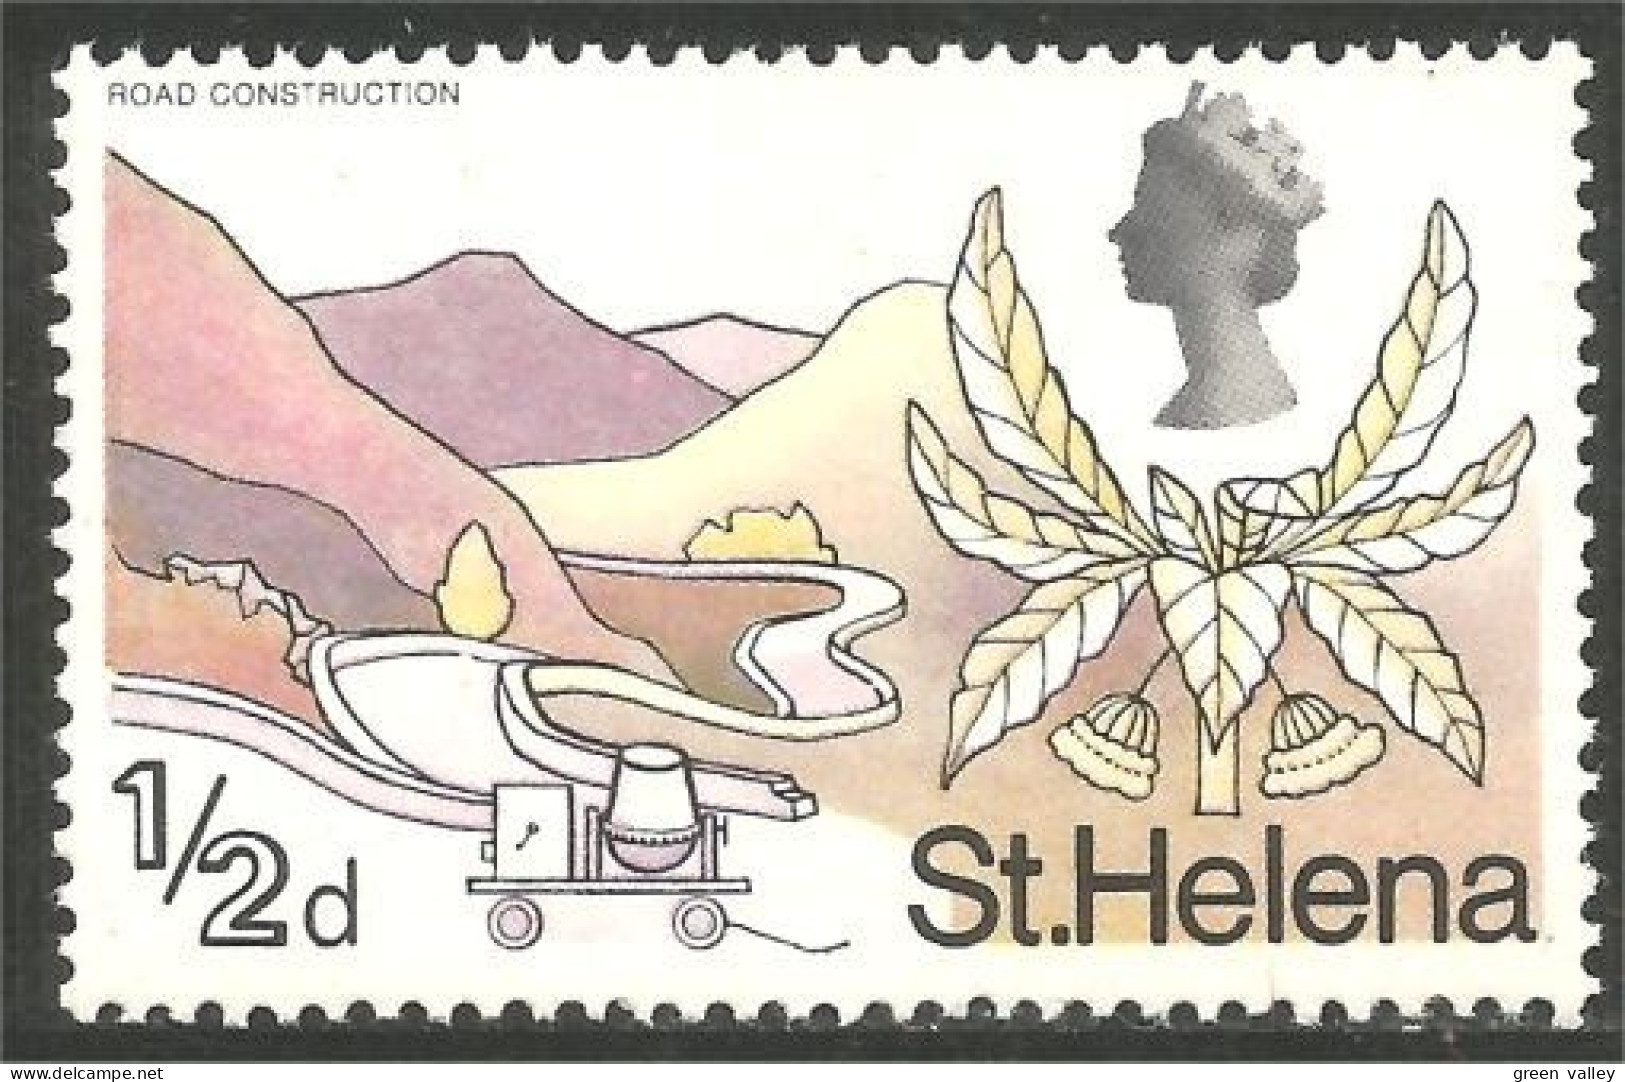 488 Saint Helena Road Construction Route MNH ** Neuf SC (HEL-13c) - Other (Earth)